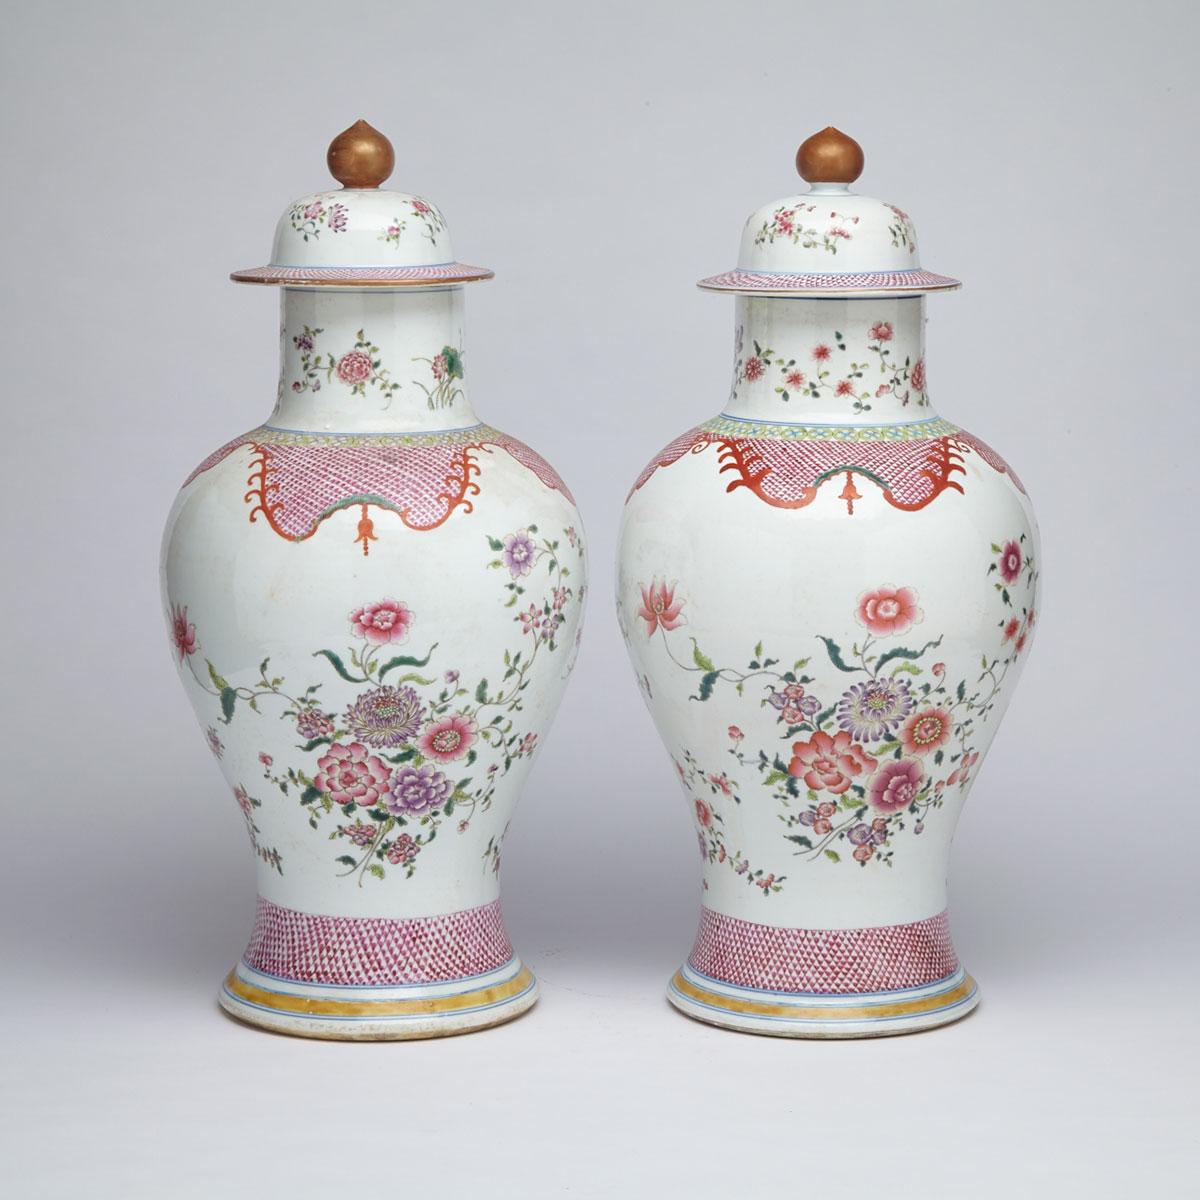 Pair of Export Famille Rose Jars and Covers